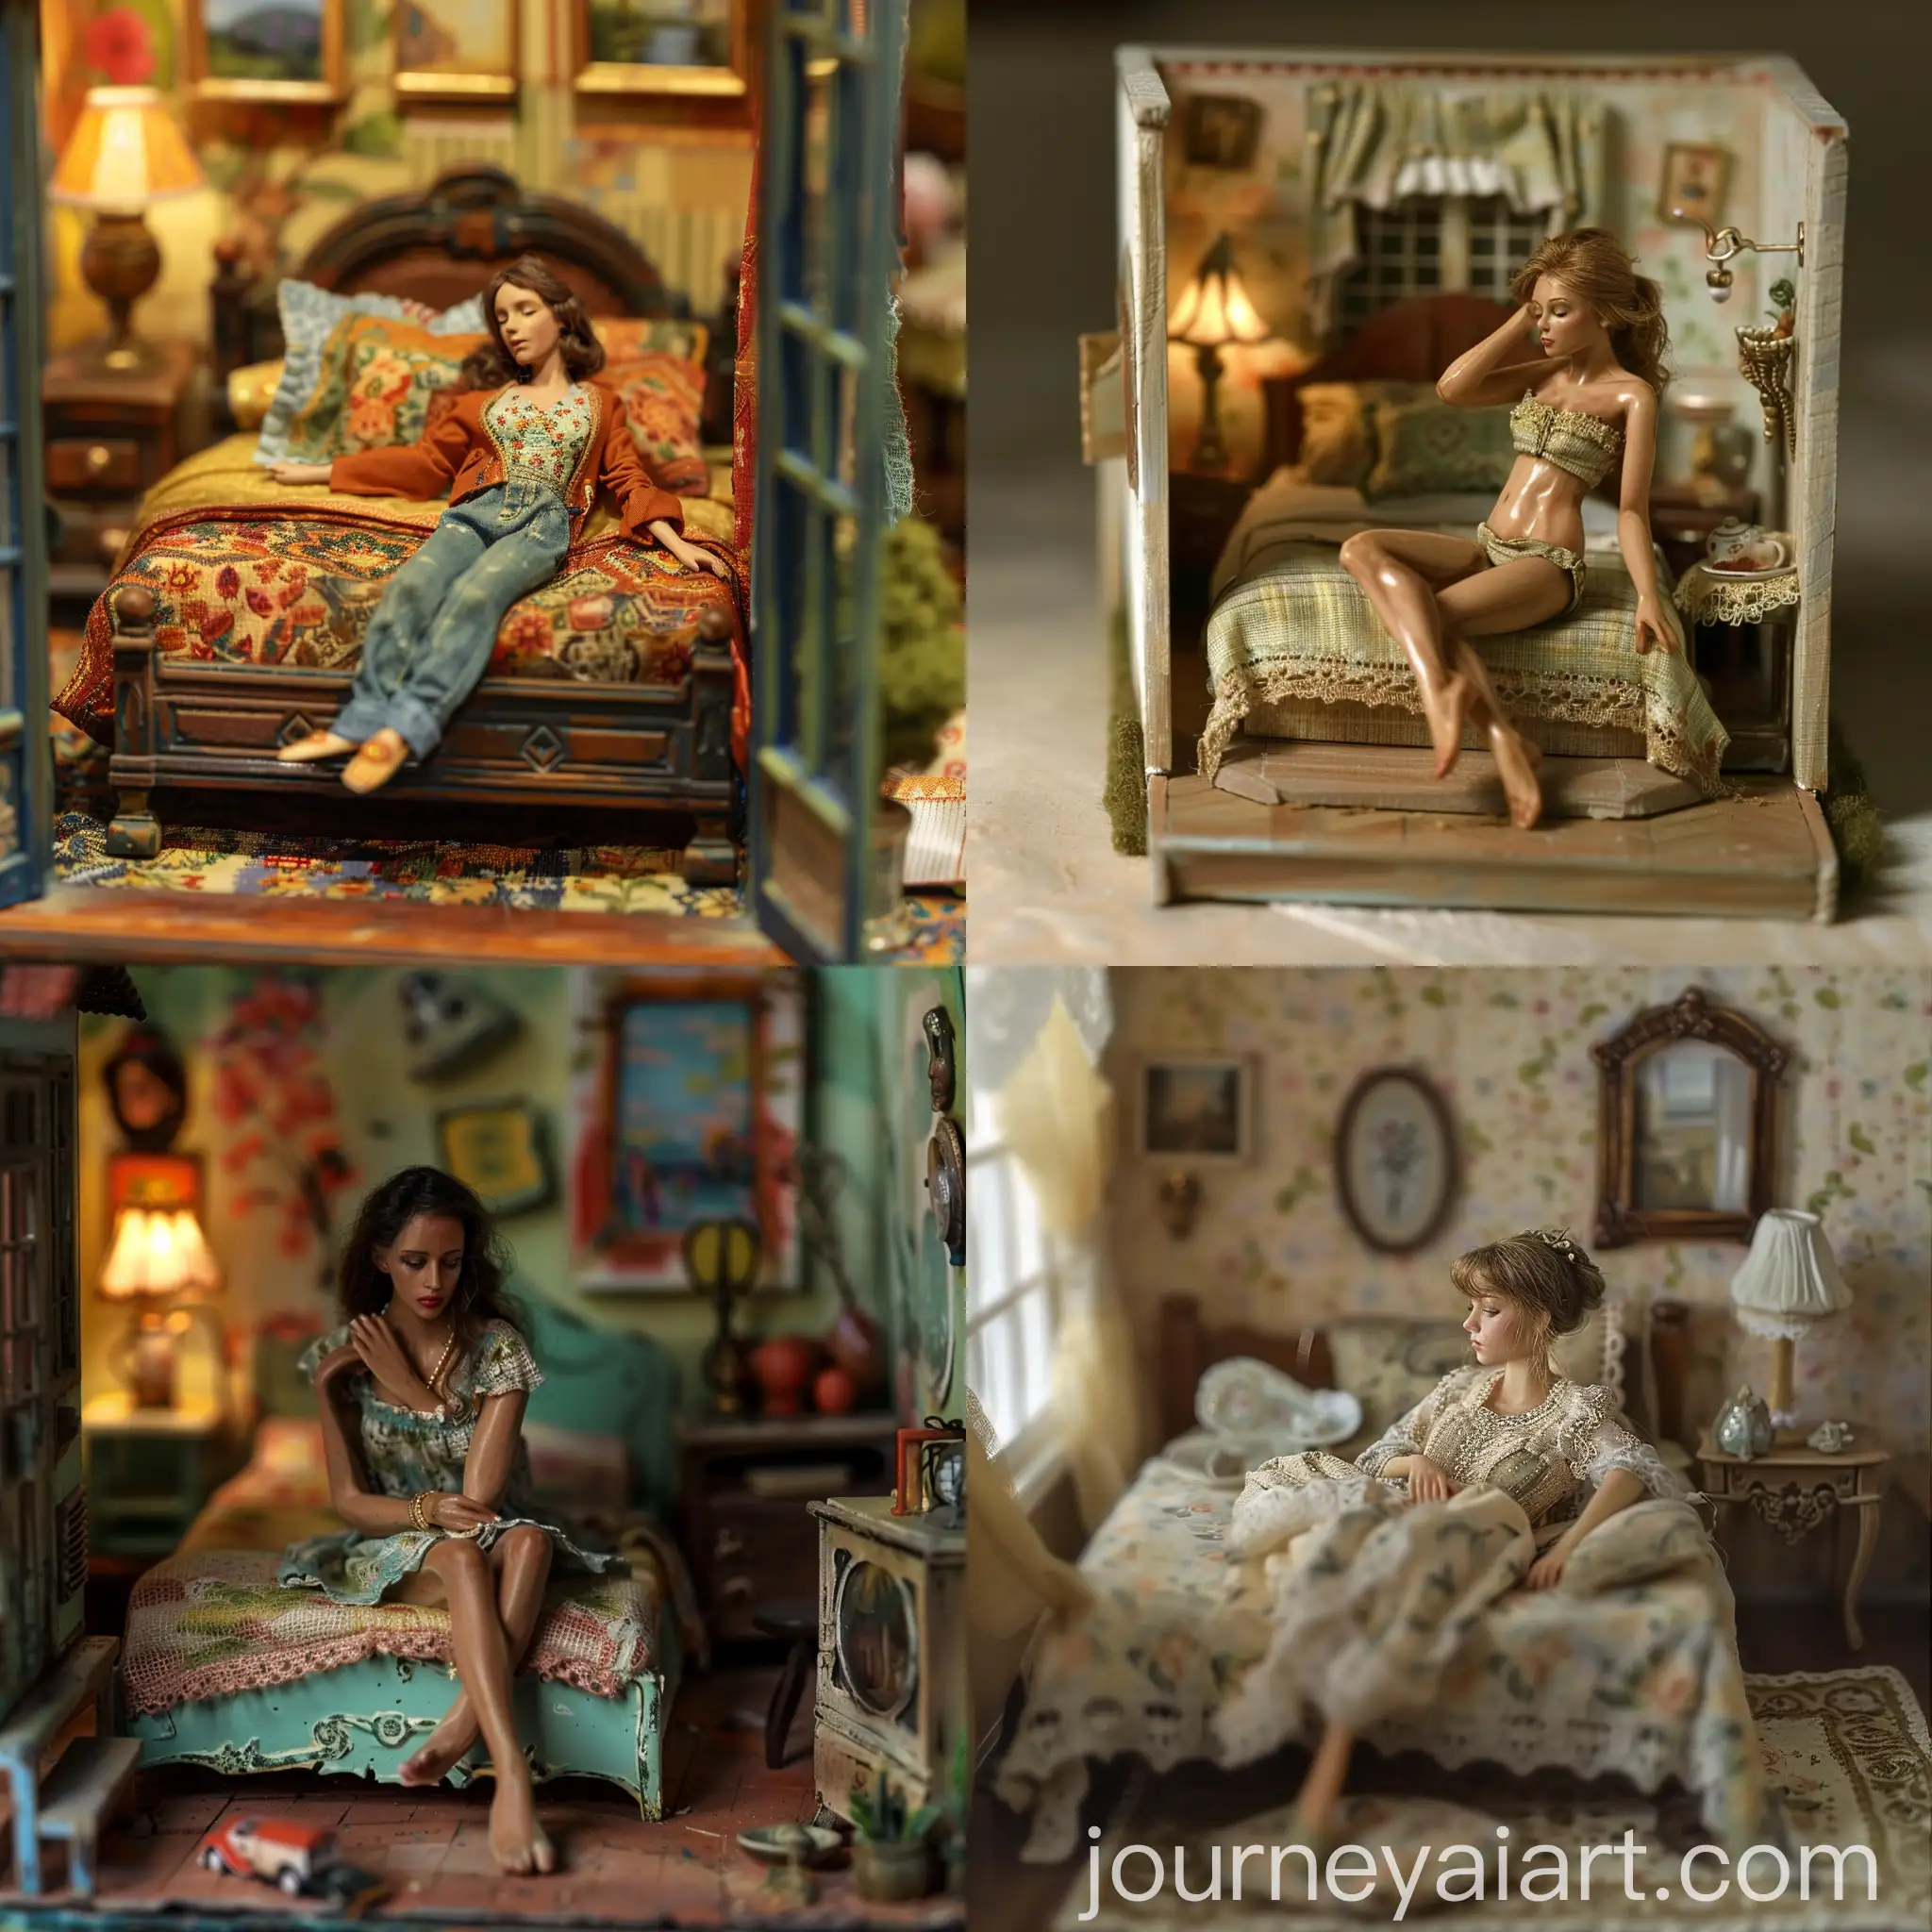 Beautiful-Young-Woman-Relaxing-on-Miniature-Bed-in-Miniature-House-Bedroom